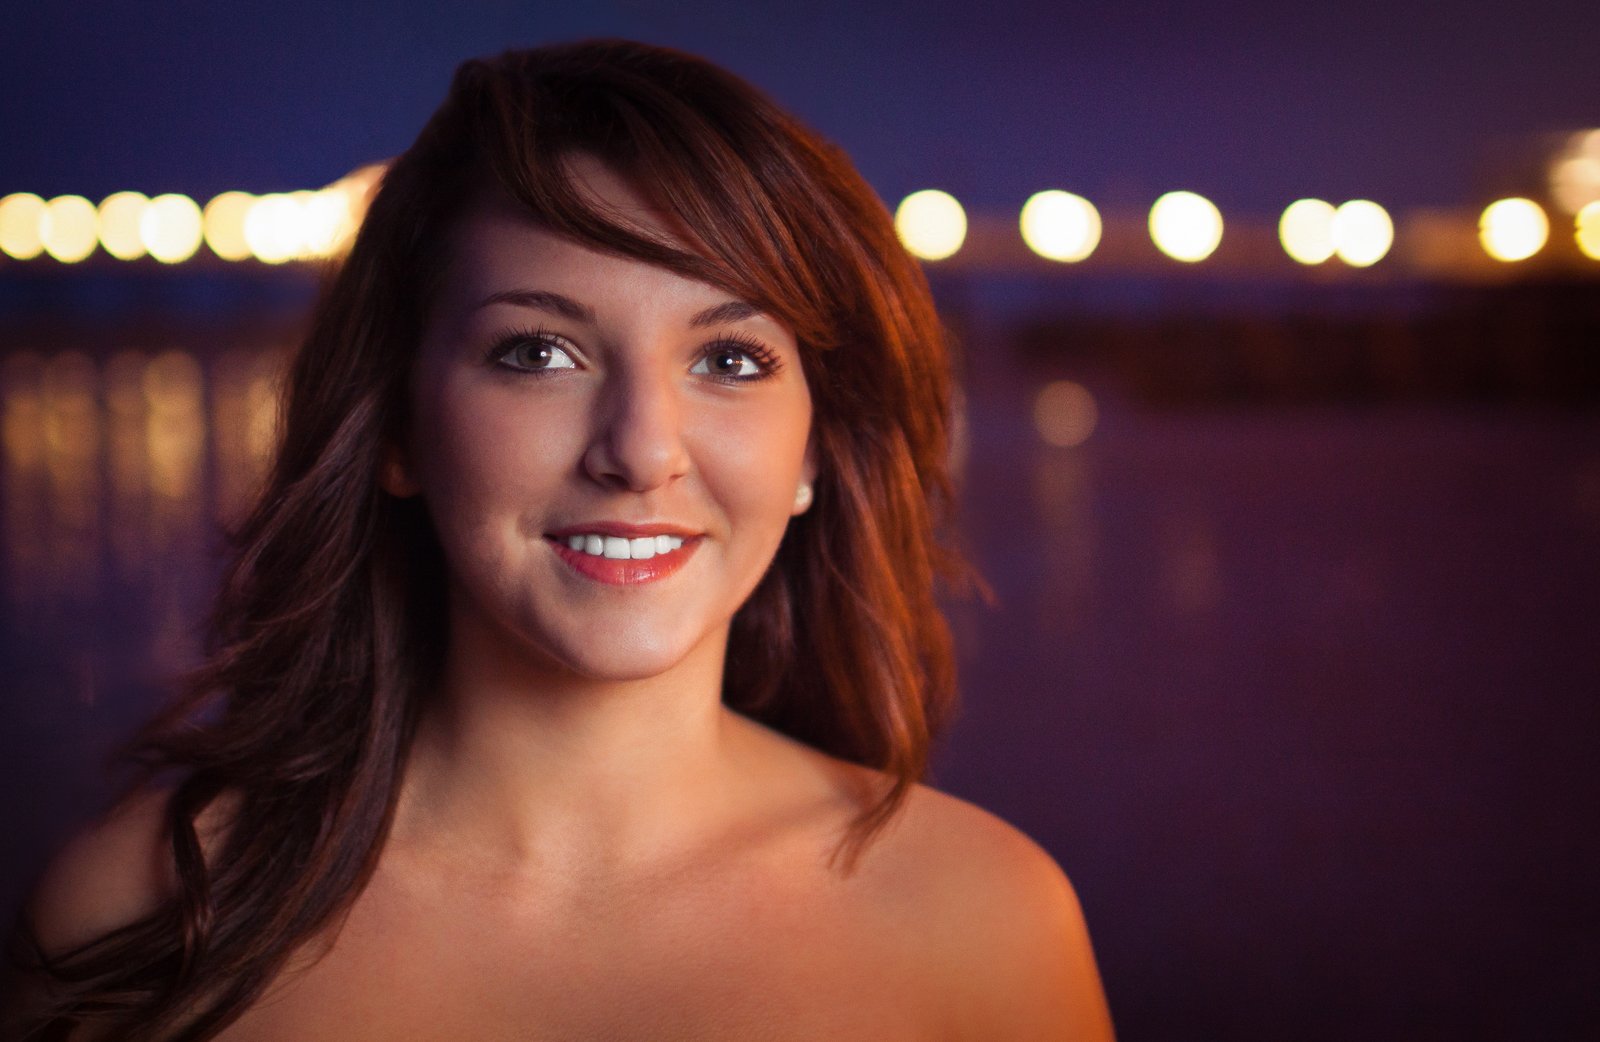 Twilight portrait lighting of a young woman with bokeh lights in the background